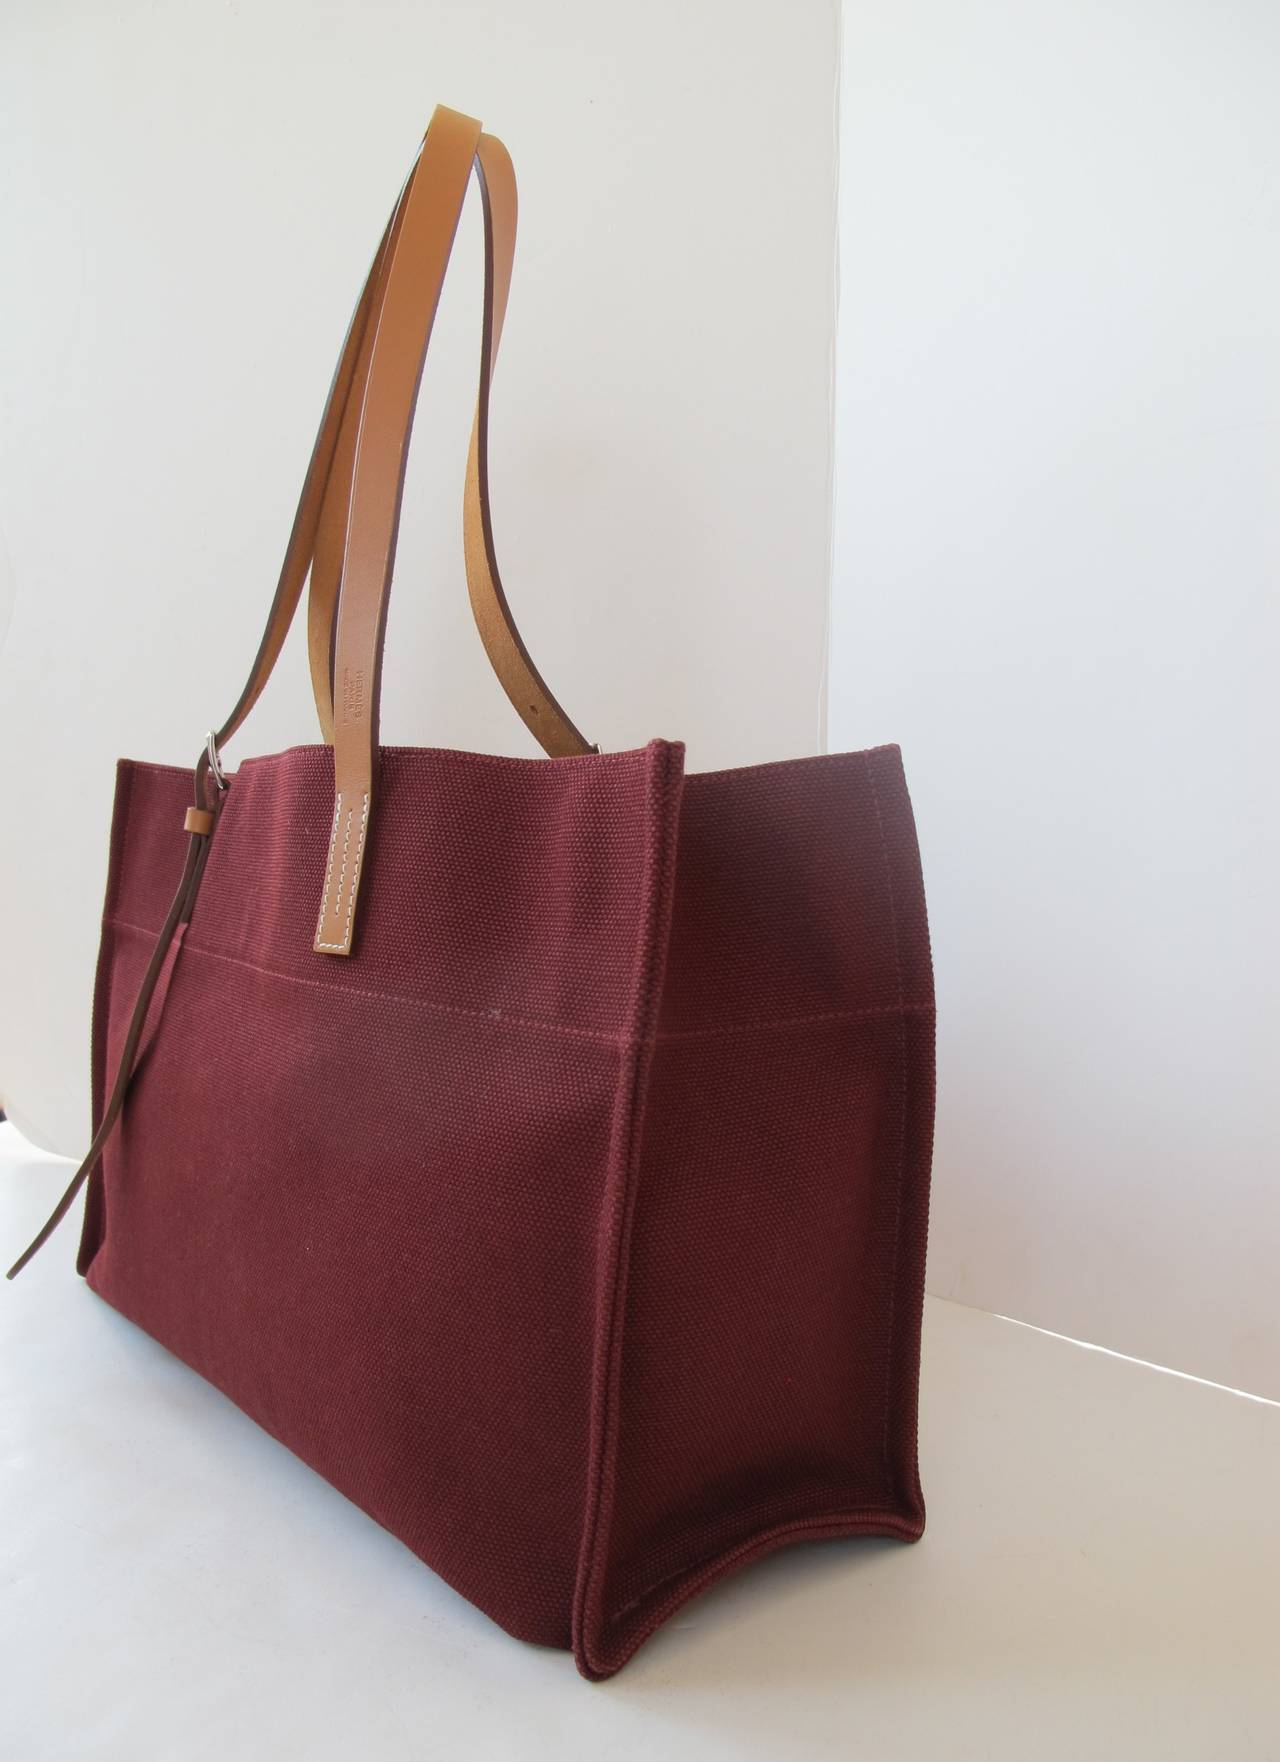 This chic useful Etriviere tote bag with adjustment calfskin handles may be used for every day and travel. It is comfortable to use since it is so light in weight. On the leather handle, it reads: Hermes, Paris, Made in France. The canvas fabric is